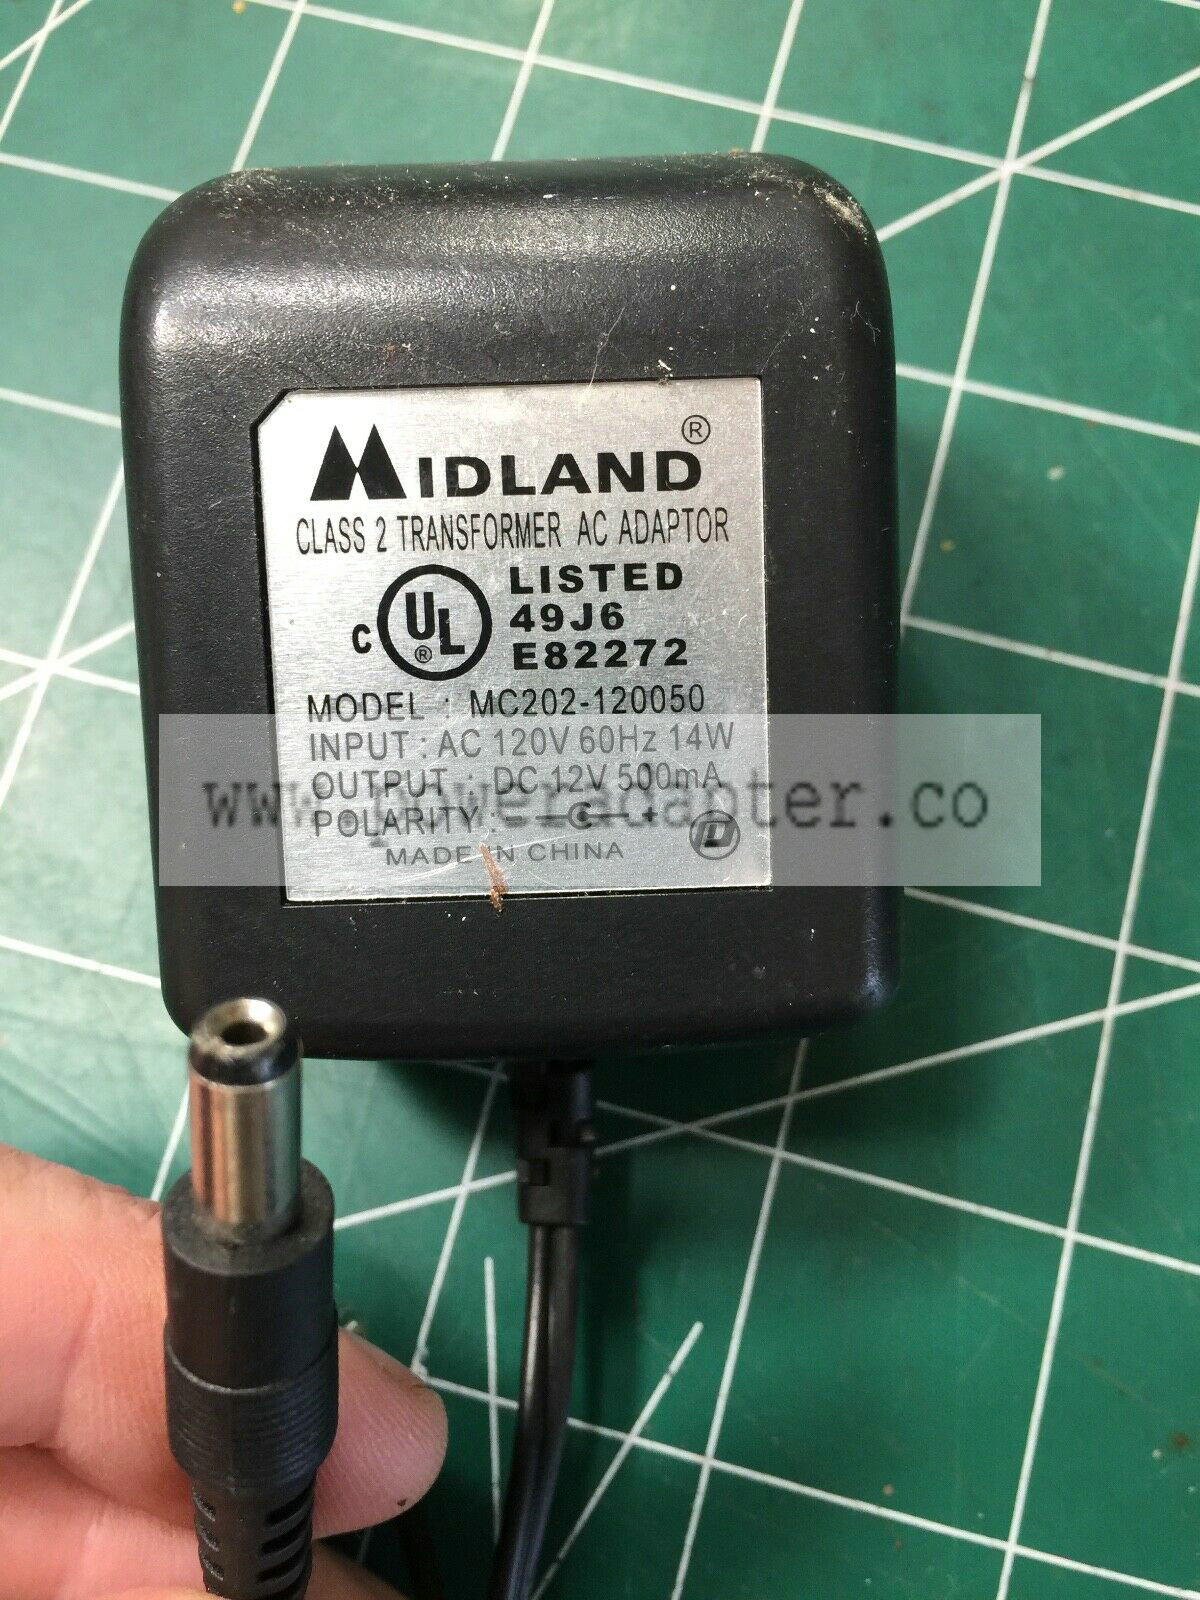 MIDLAND 12V, 500mA AC/DC WALL WART POWER SUPPLY ADAPTER CORD MODEL#MC202-120050 power supply we inspected to ensure - Click Image to Close